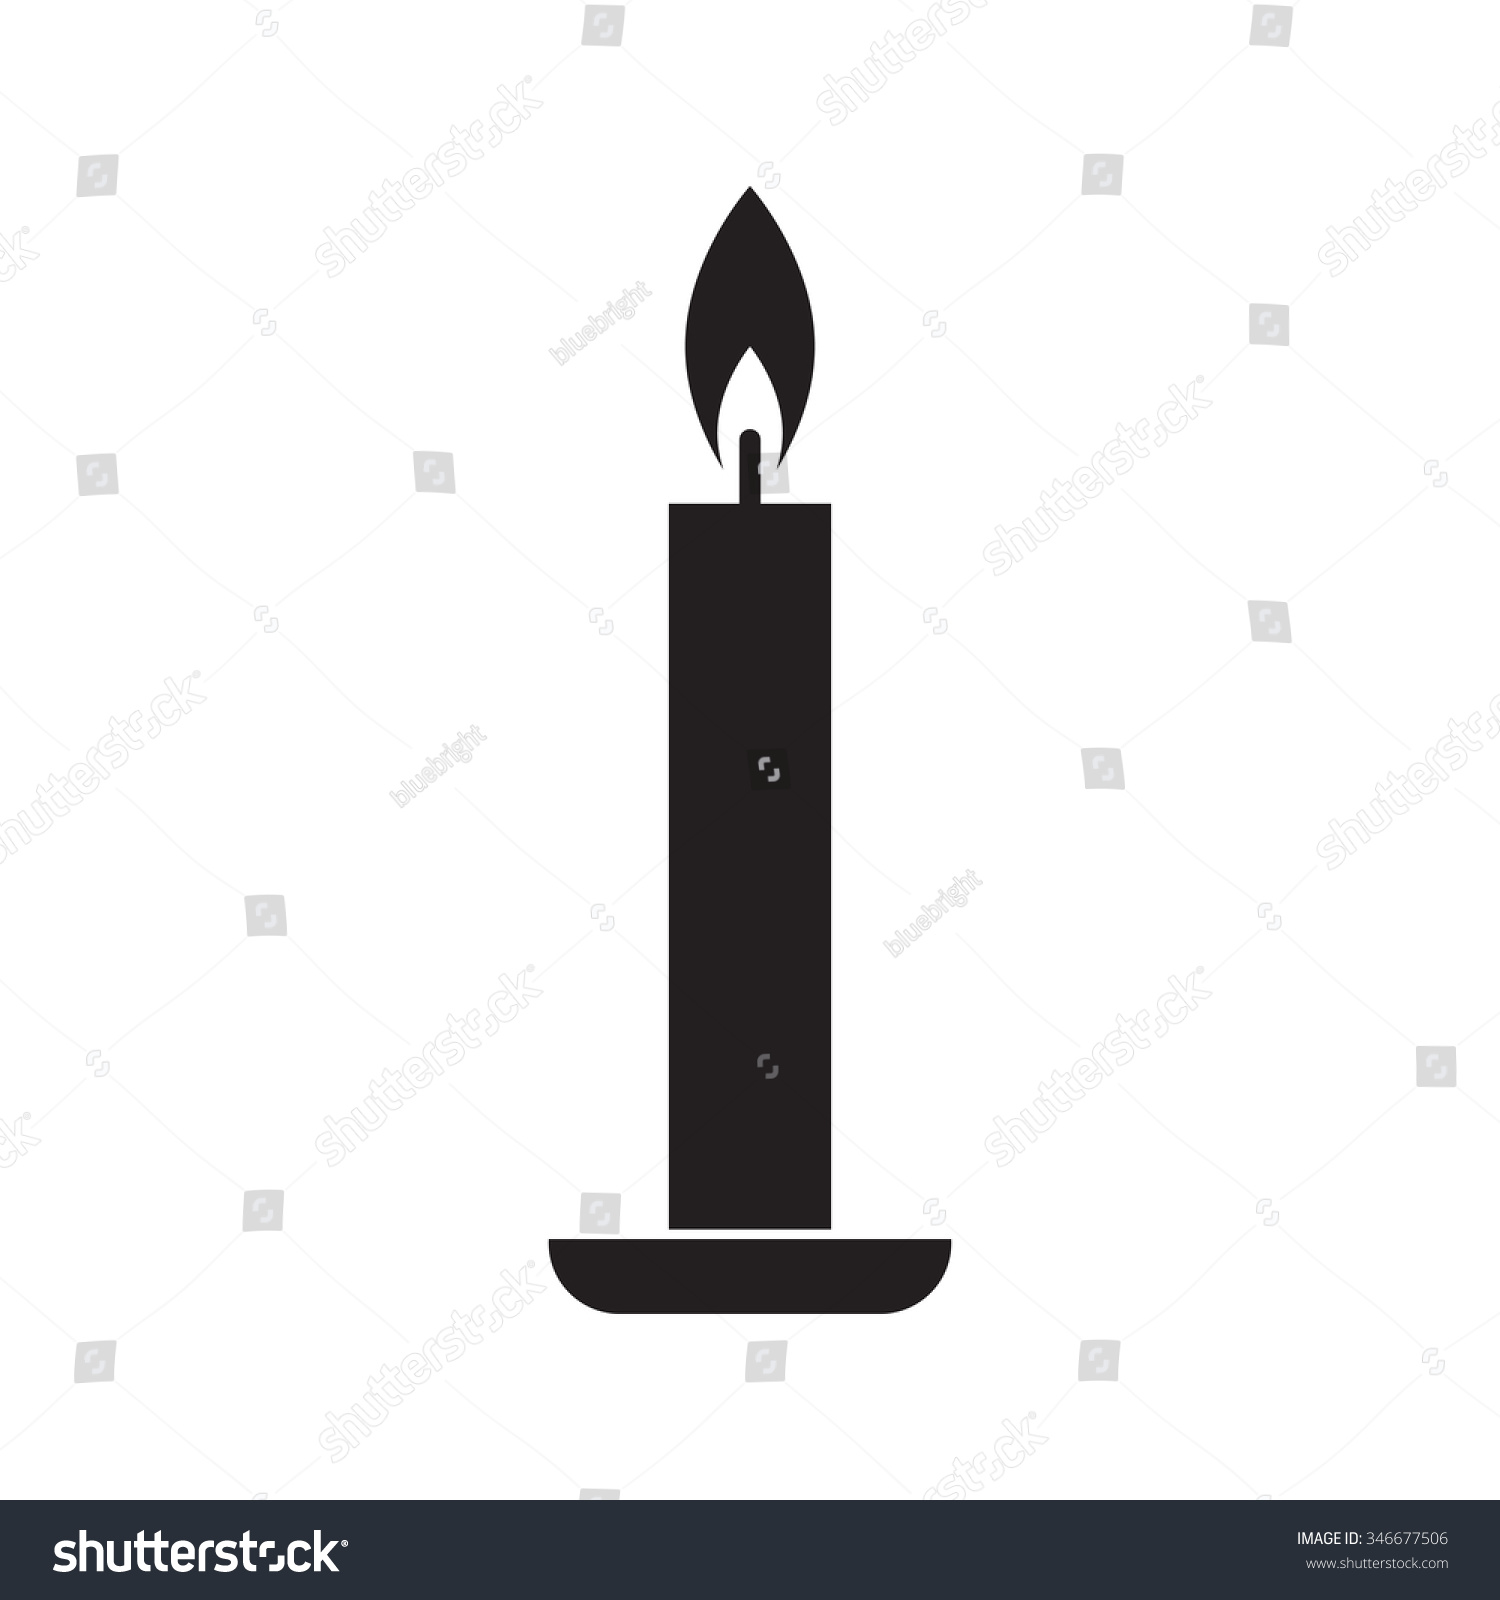 Single Candle Silhouette With A Flame, Isolated On White 